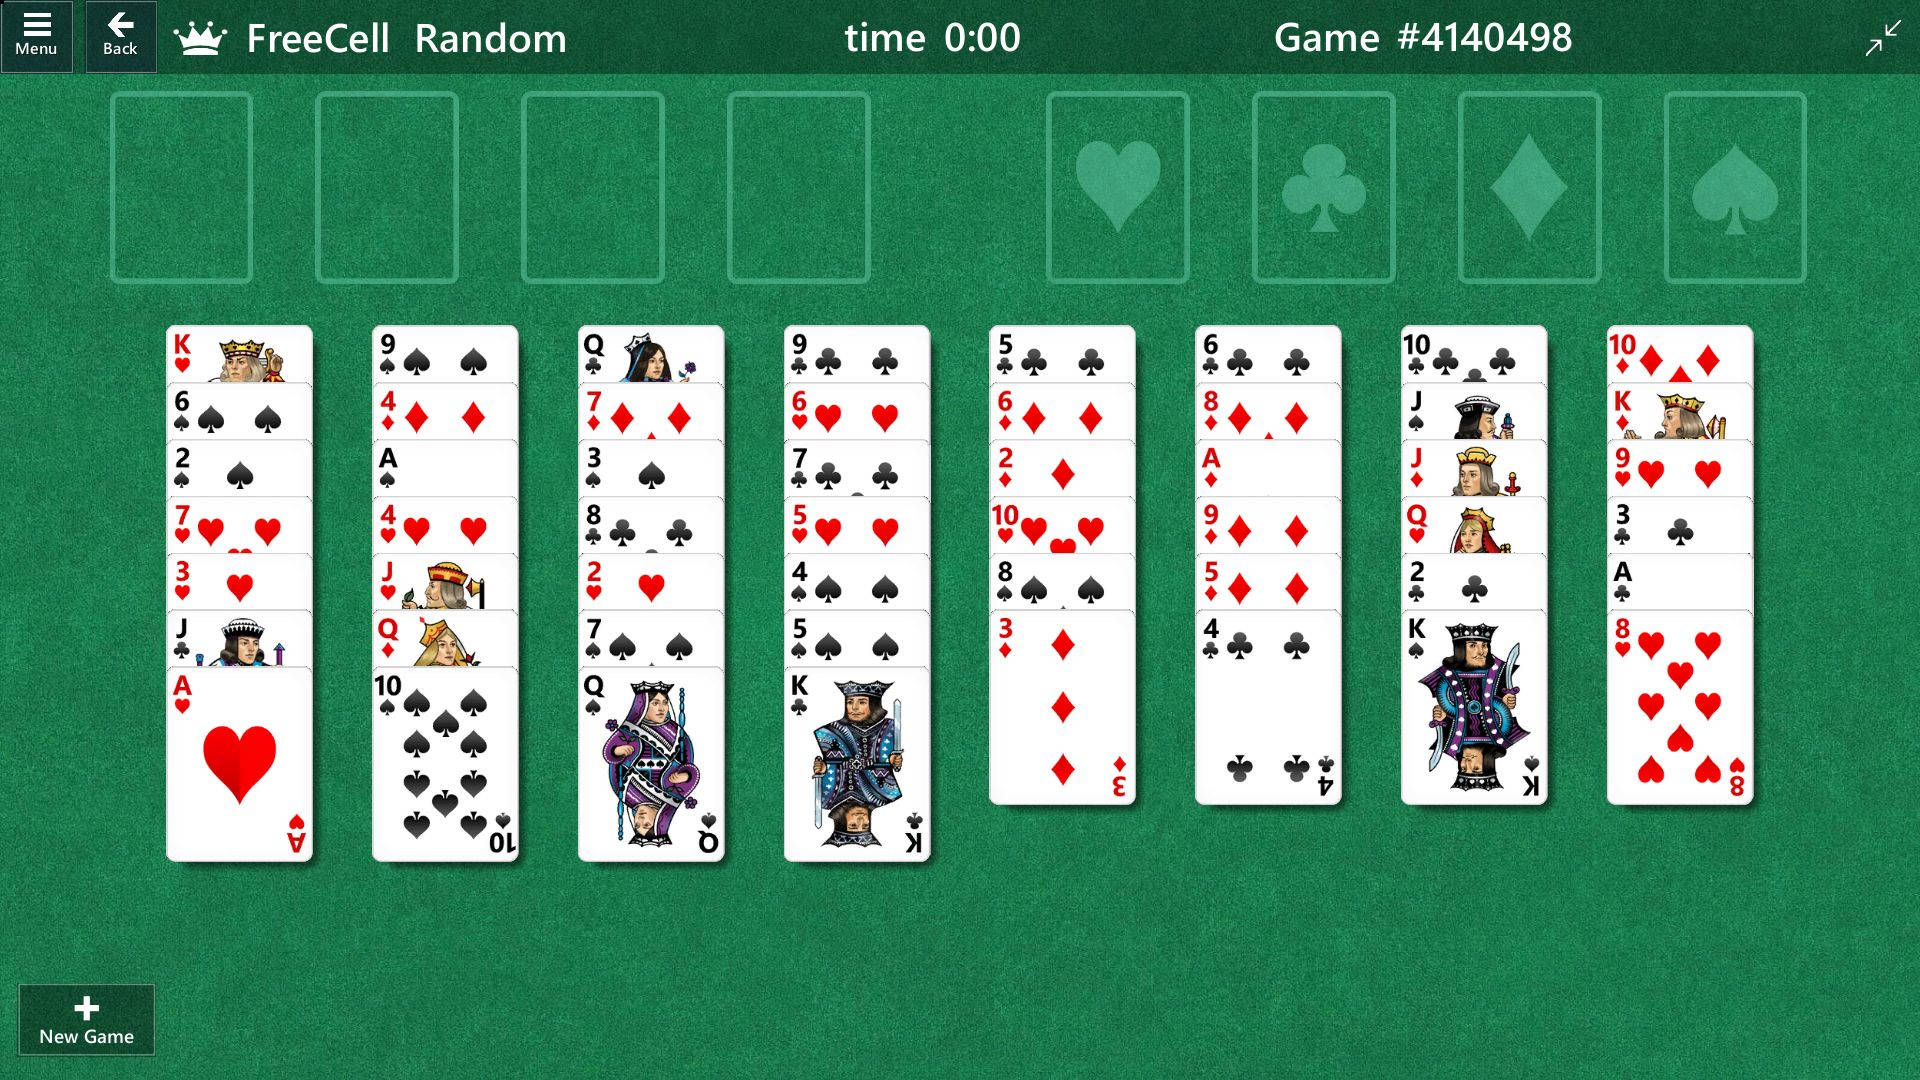 Intense Game of Microsoft Solitaire Free Cell Wallpaper